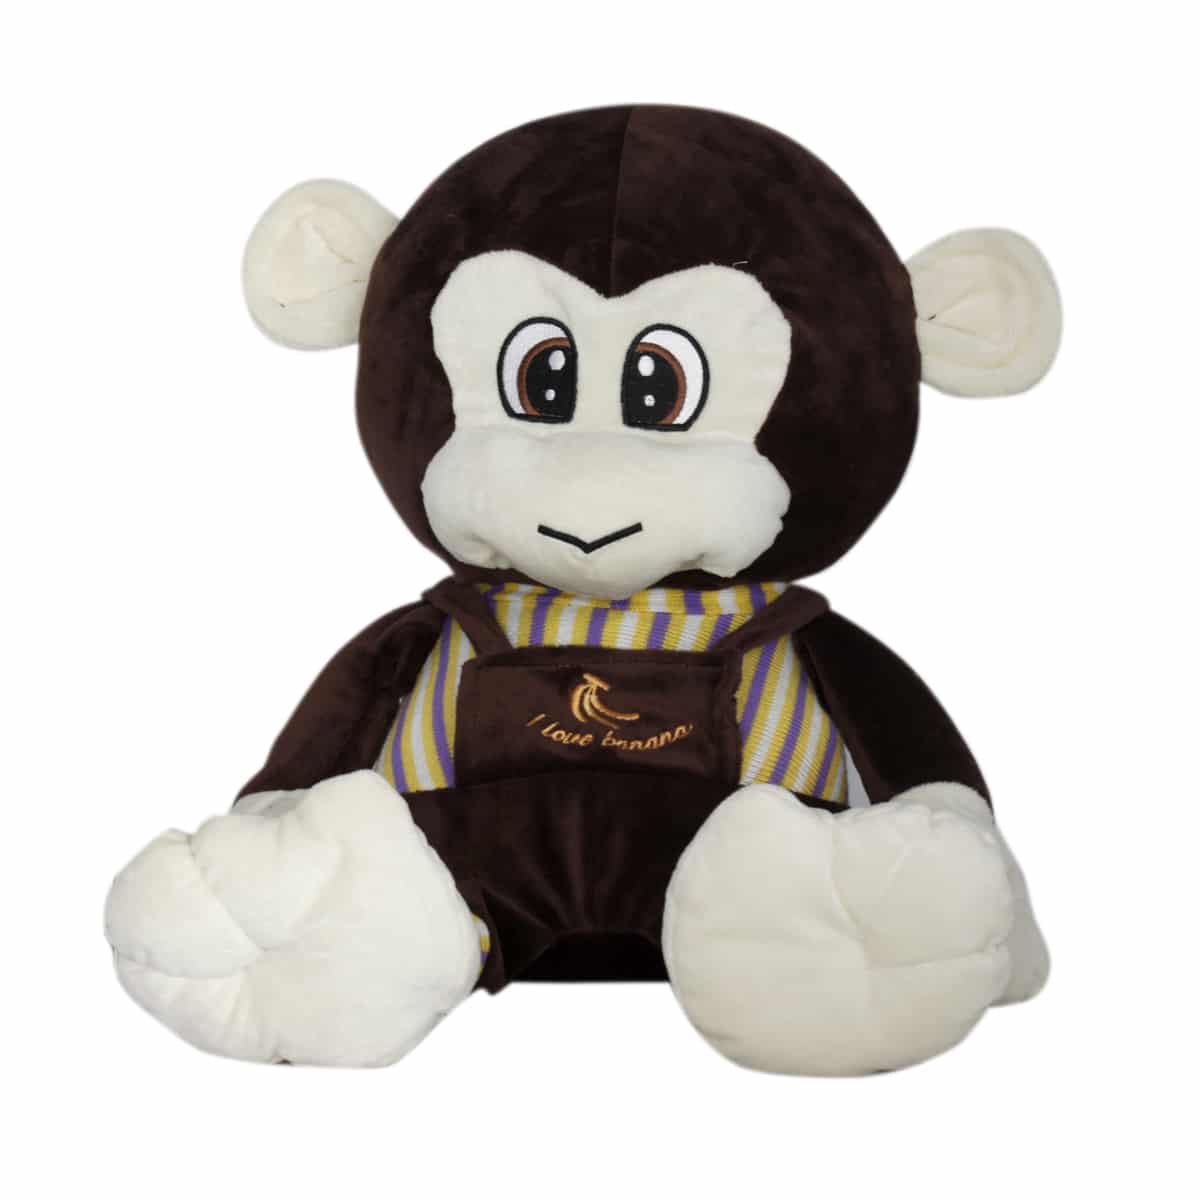 Monkey with a blouse